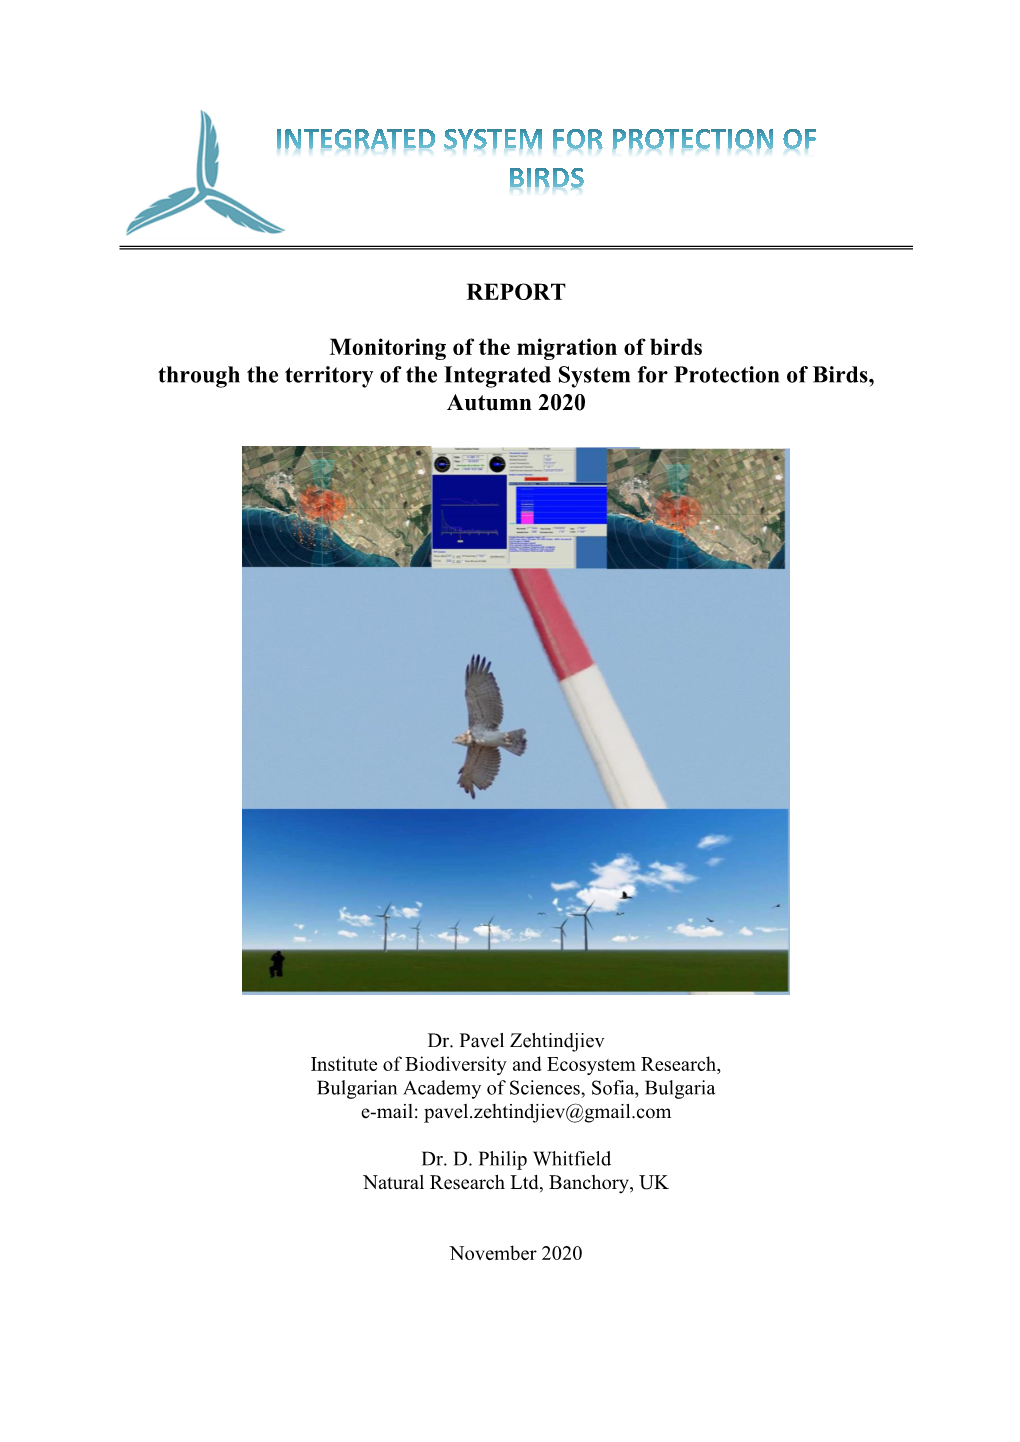 REPORT Monitoring of the Migration of Birds Through the Territory of the Integrated System for Protection of Birds, Аutumn